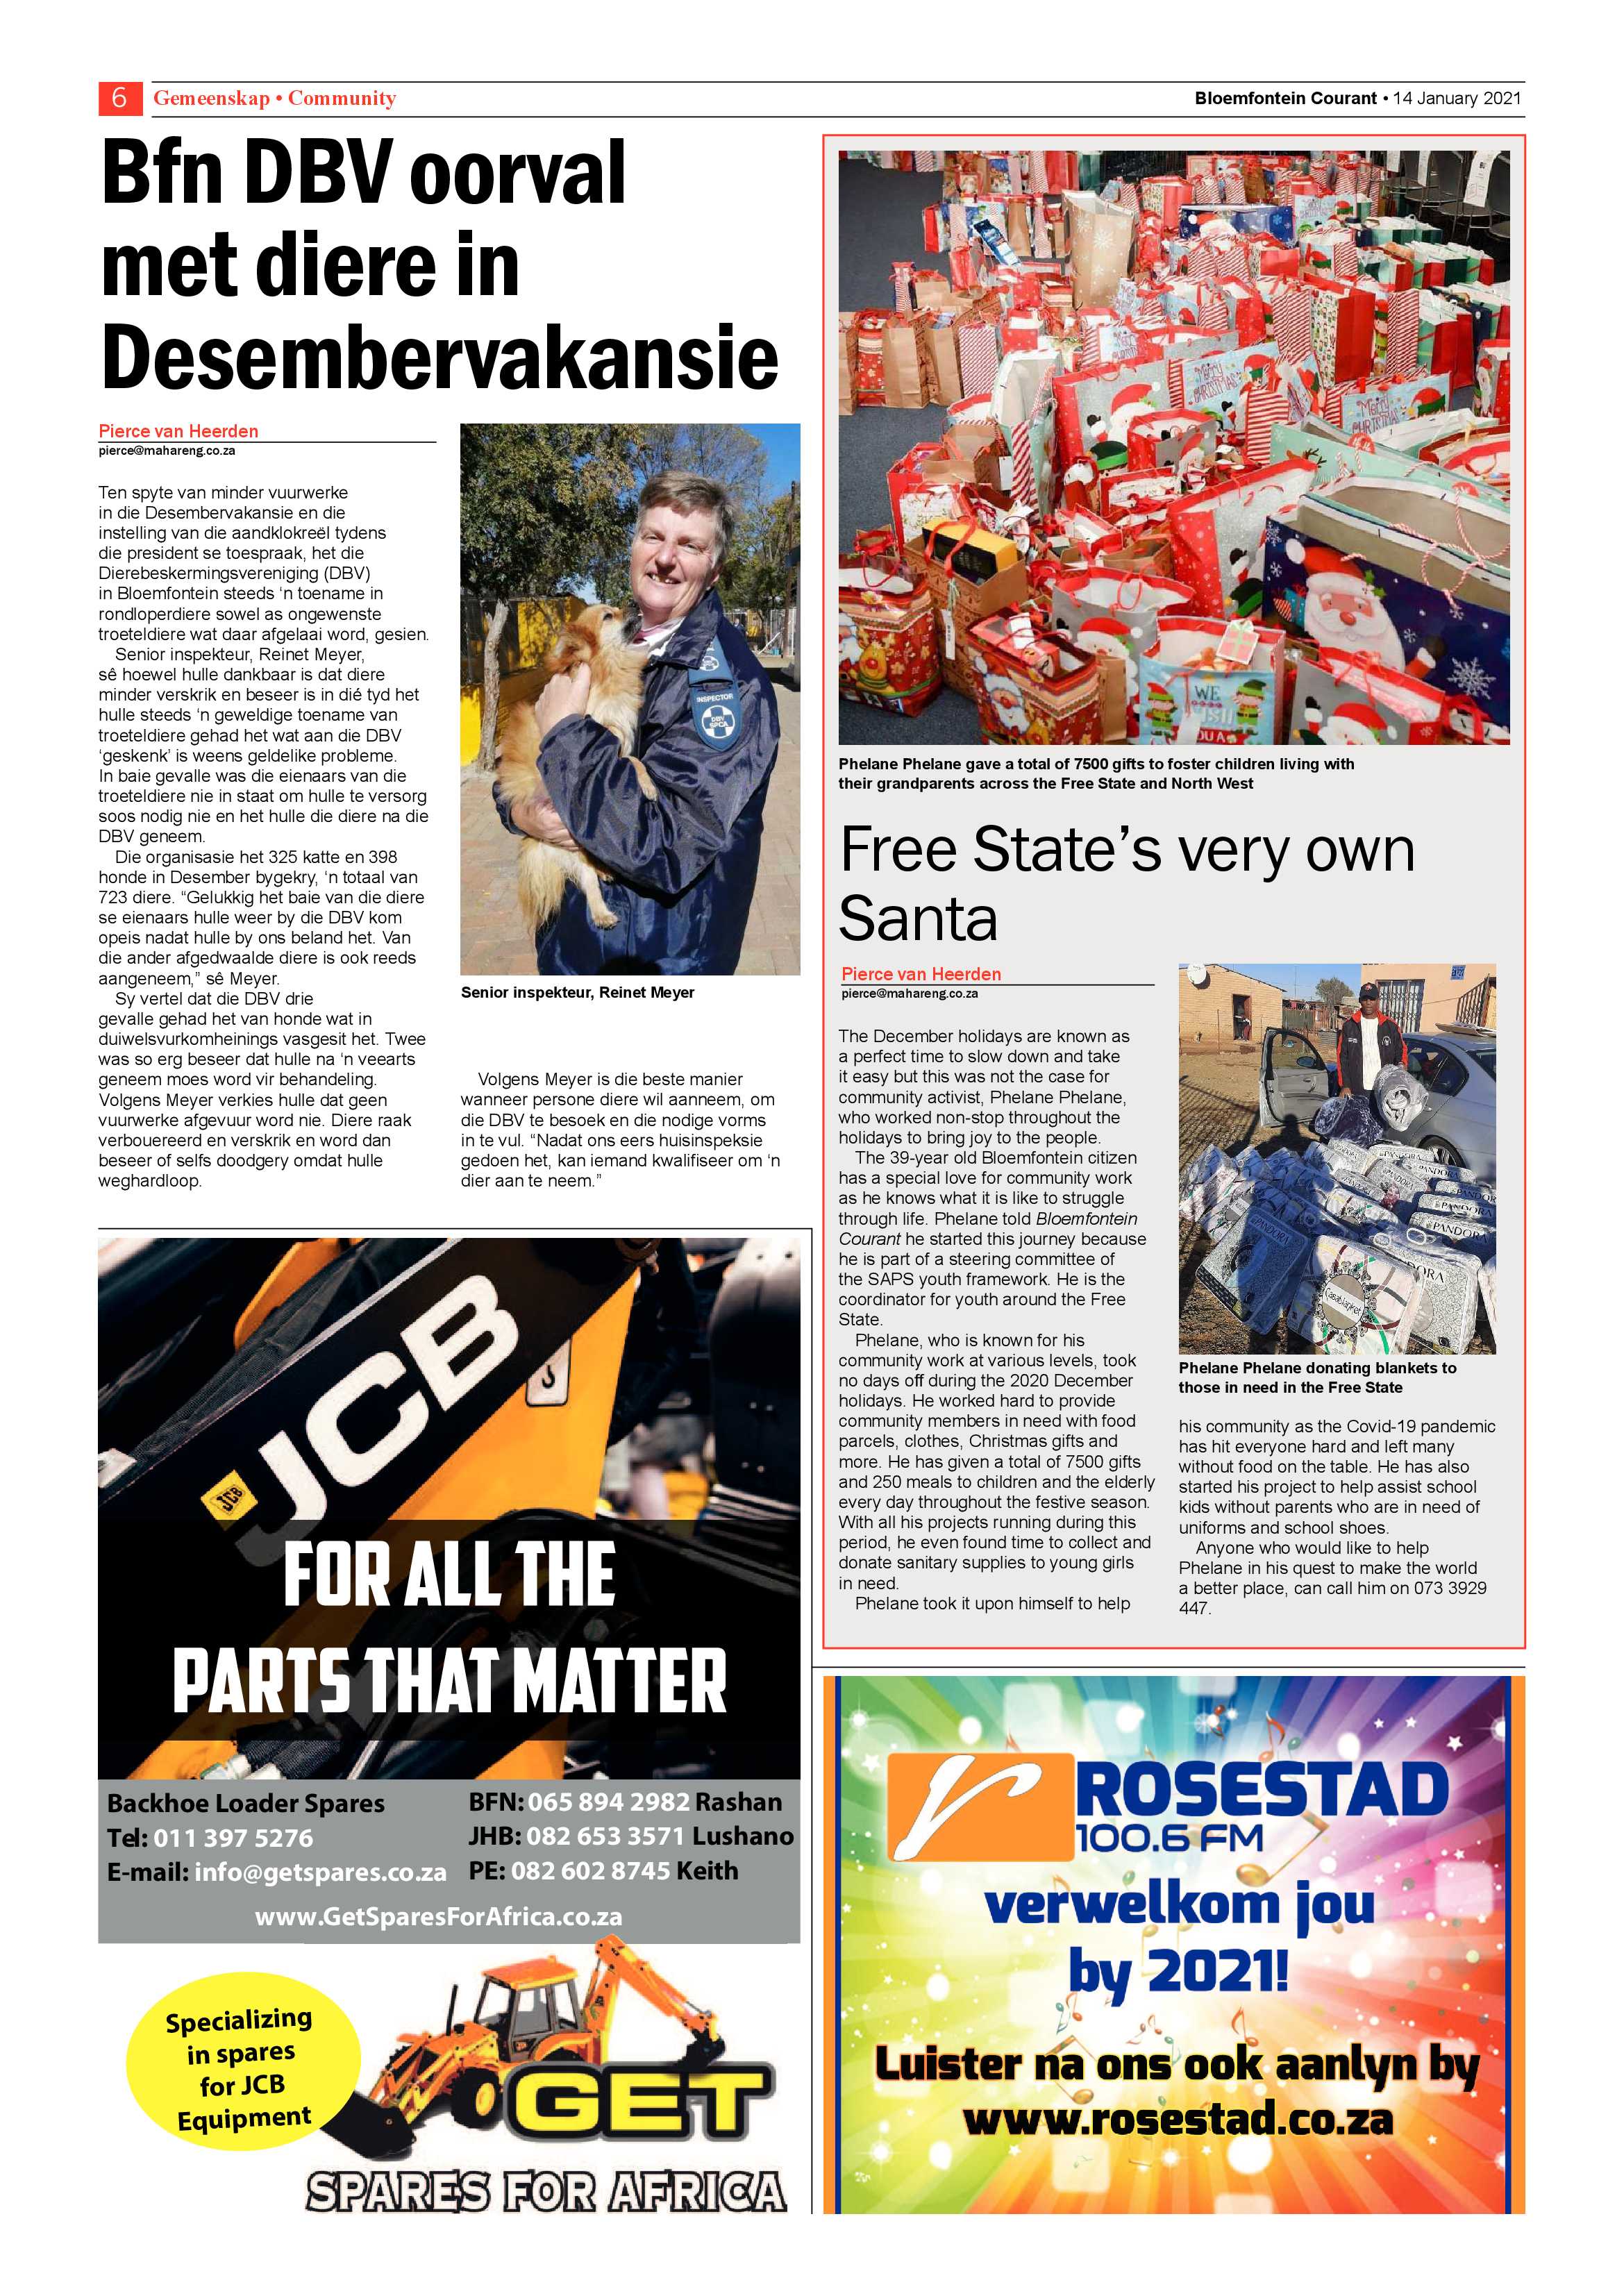 bloemfontein-courant-14-january-2021-epapers-page-6